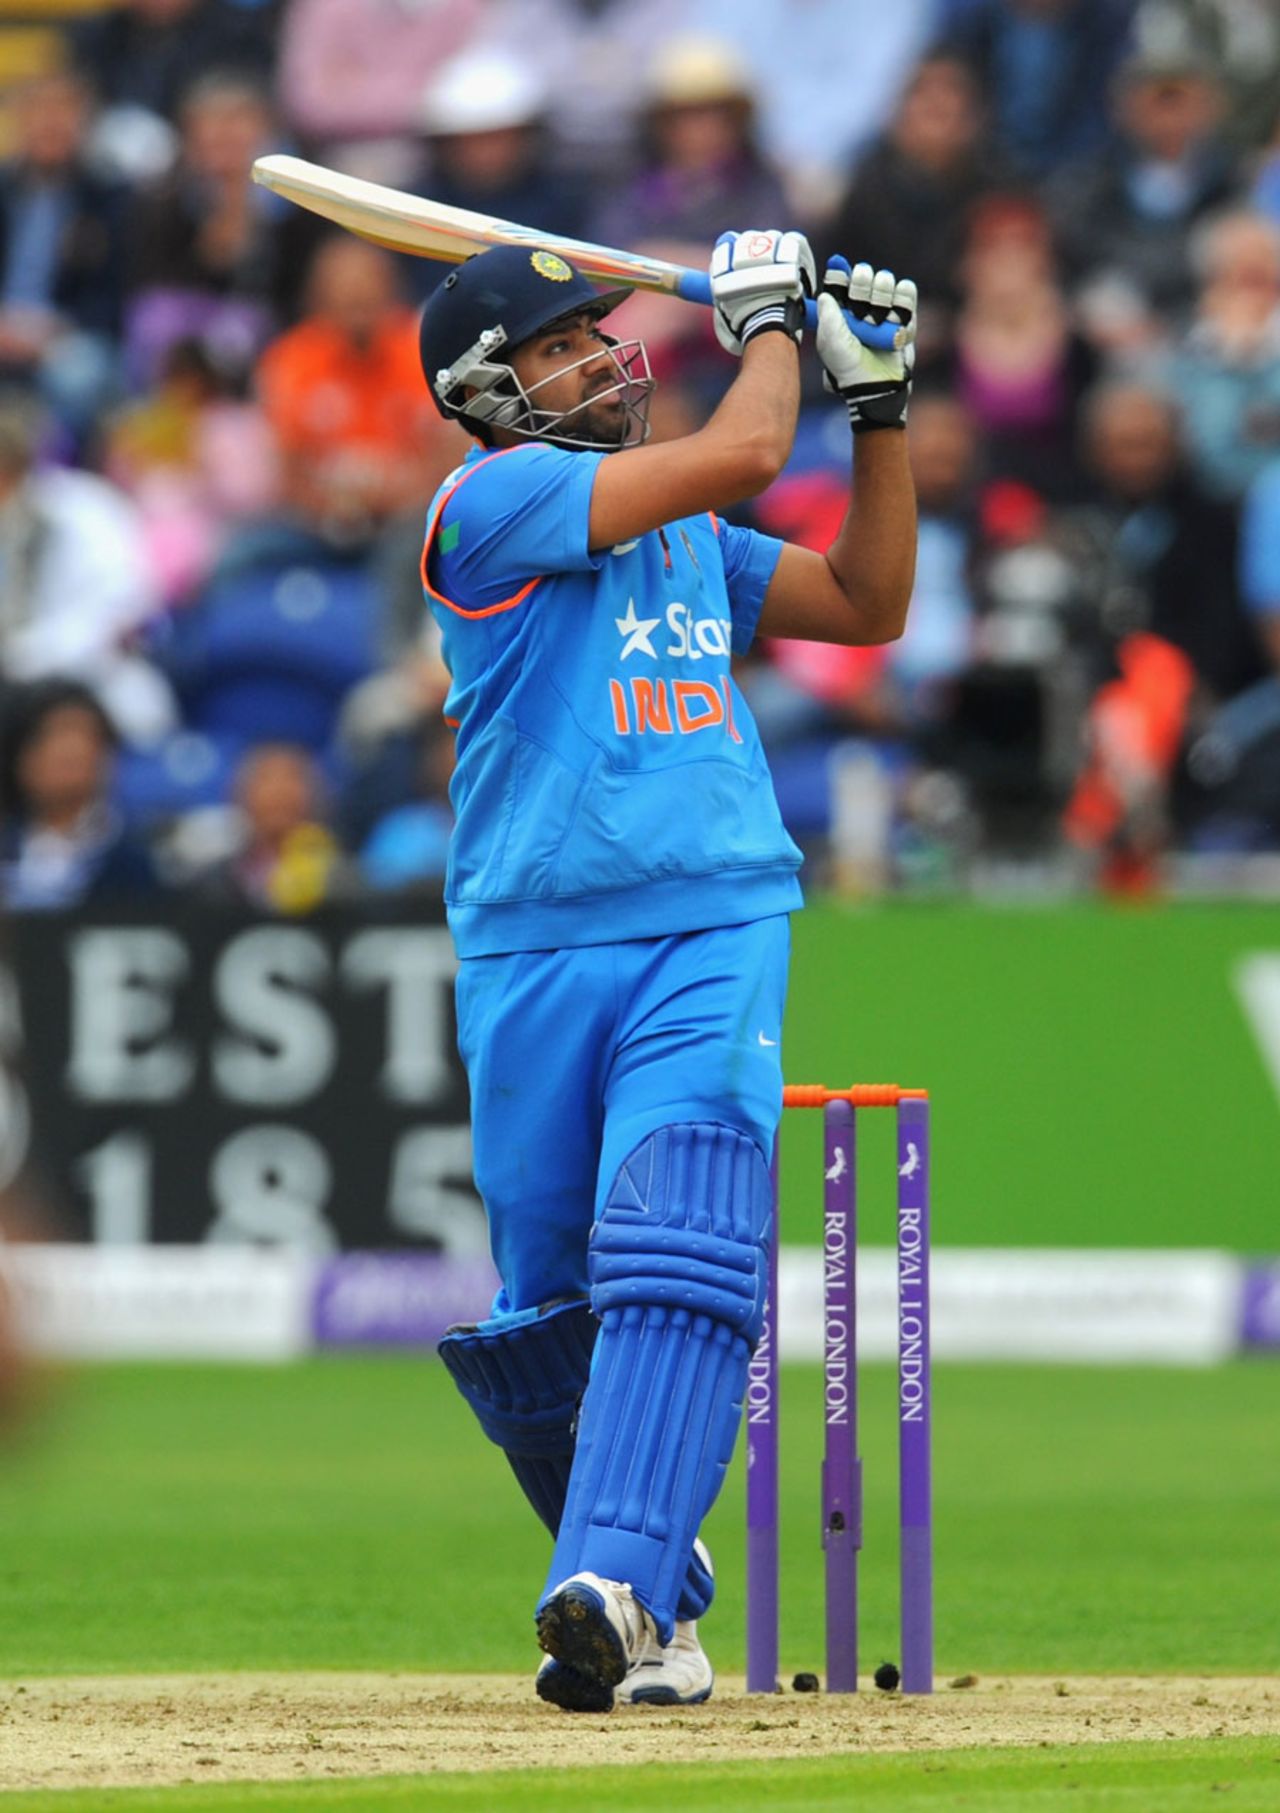 Rohit Sharma pulls for six, England v India, 2nd ODI, Cardiff, August 27, 2014